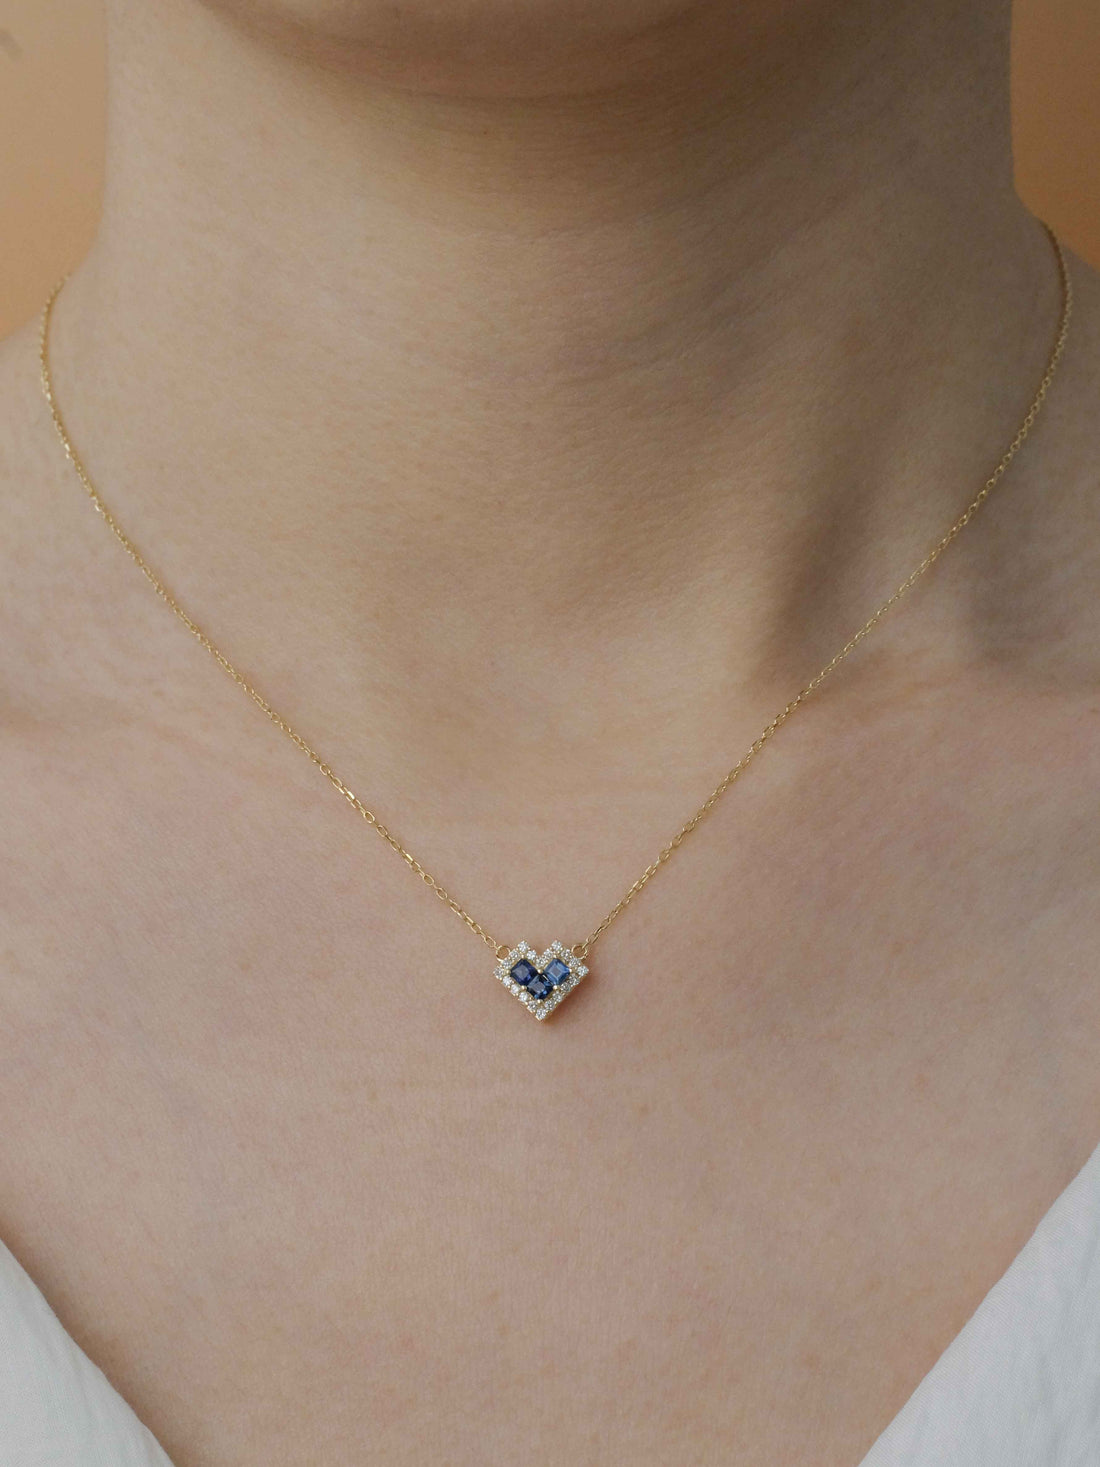 Sapphire Diamond Heart Necklace, 18k solid gold